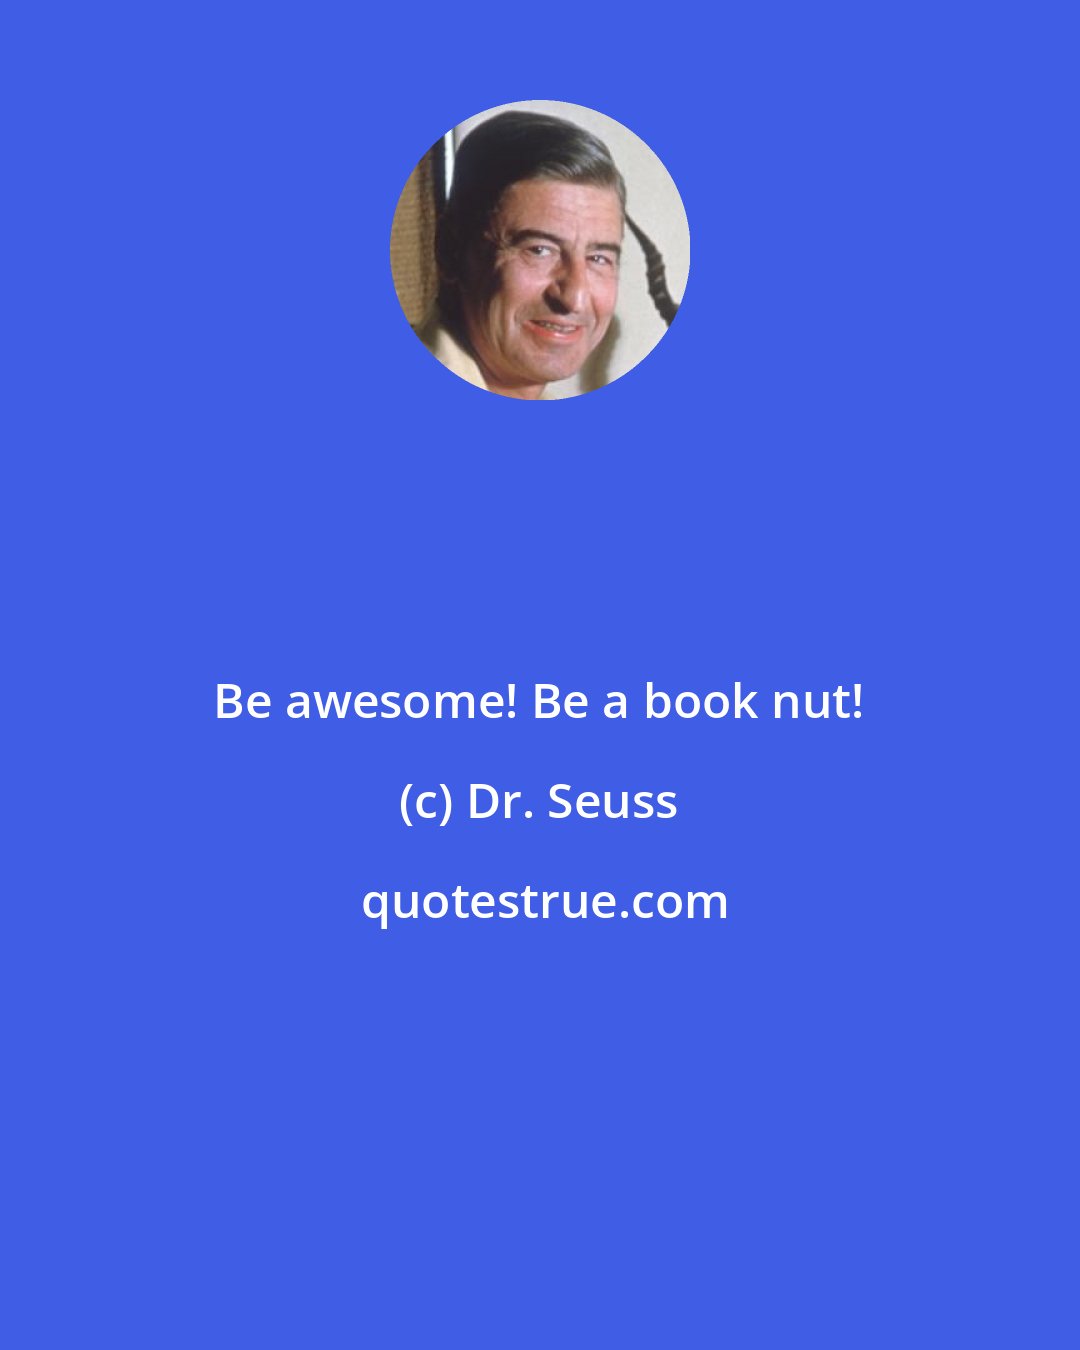 Dr. Seuss: Be awesome! Be a book nut!